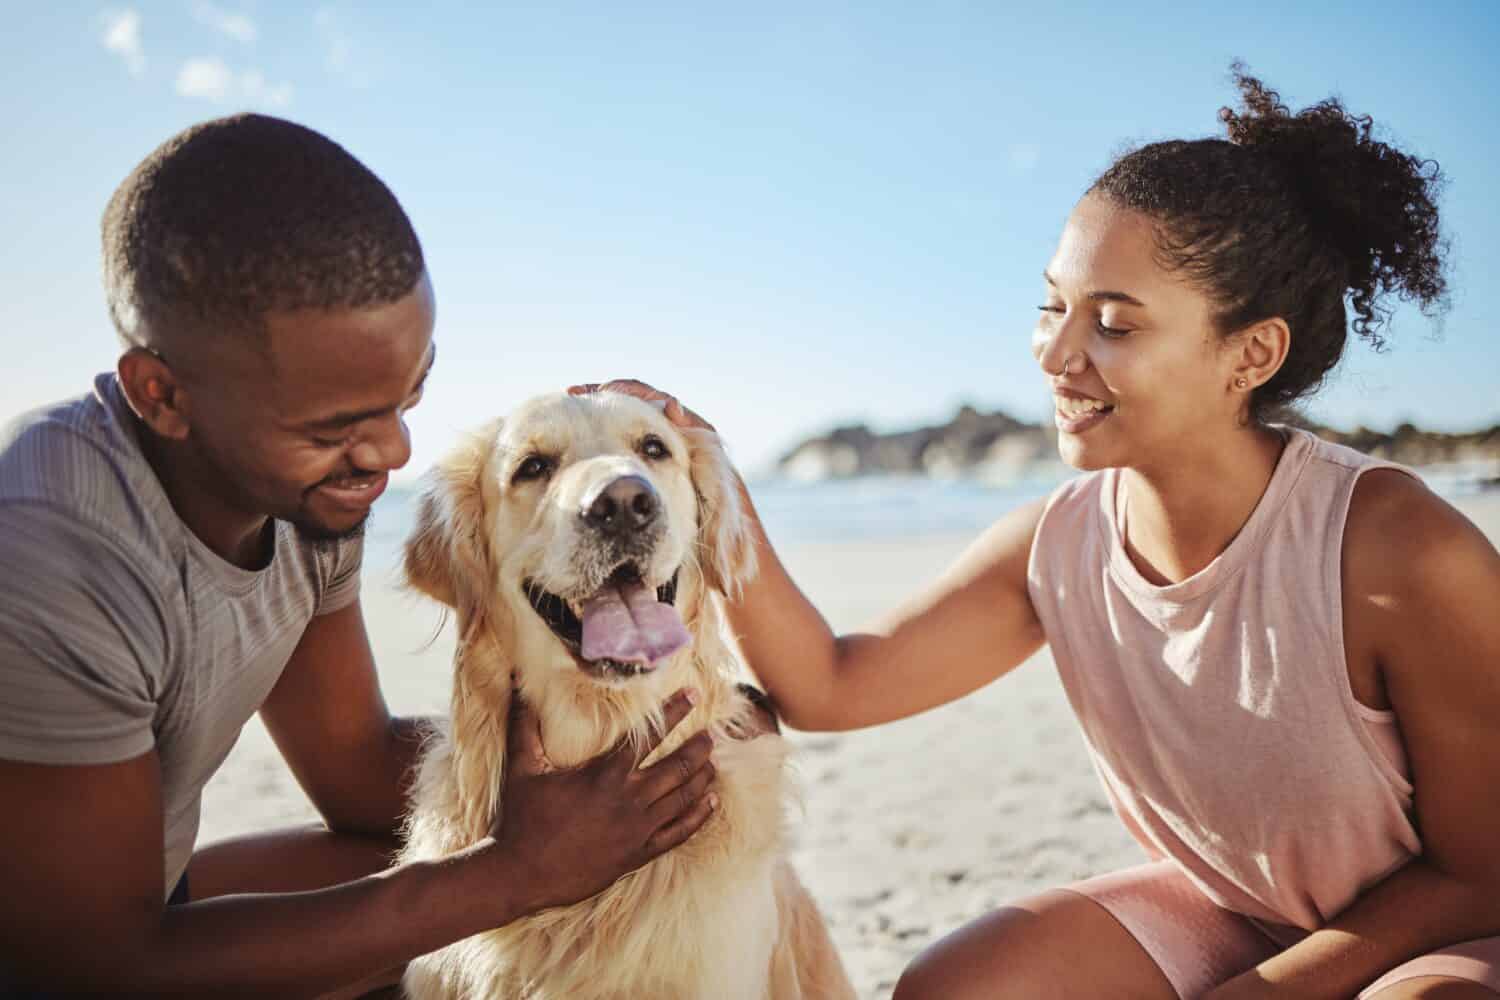 Relax, couple and dog at a beach, happy and smile while bonding, sitting and touching their puppy against blue sky background. Love, black family and pet labrador enjoy a morning outing at the ocean